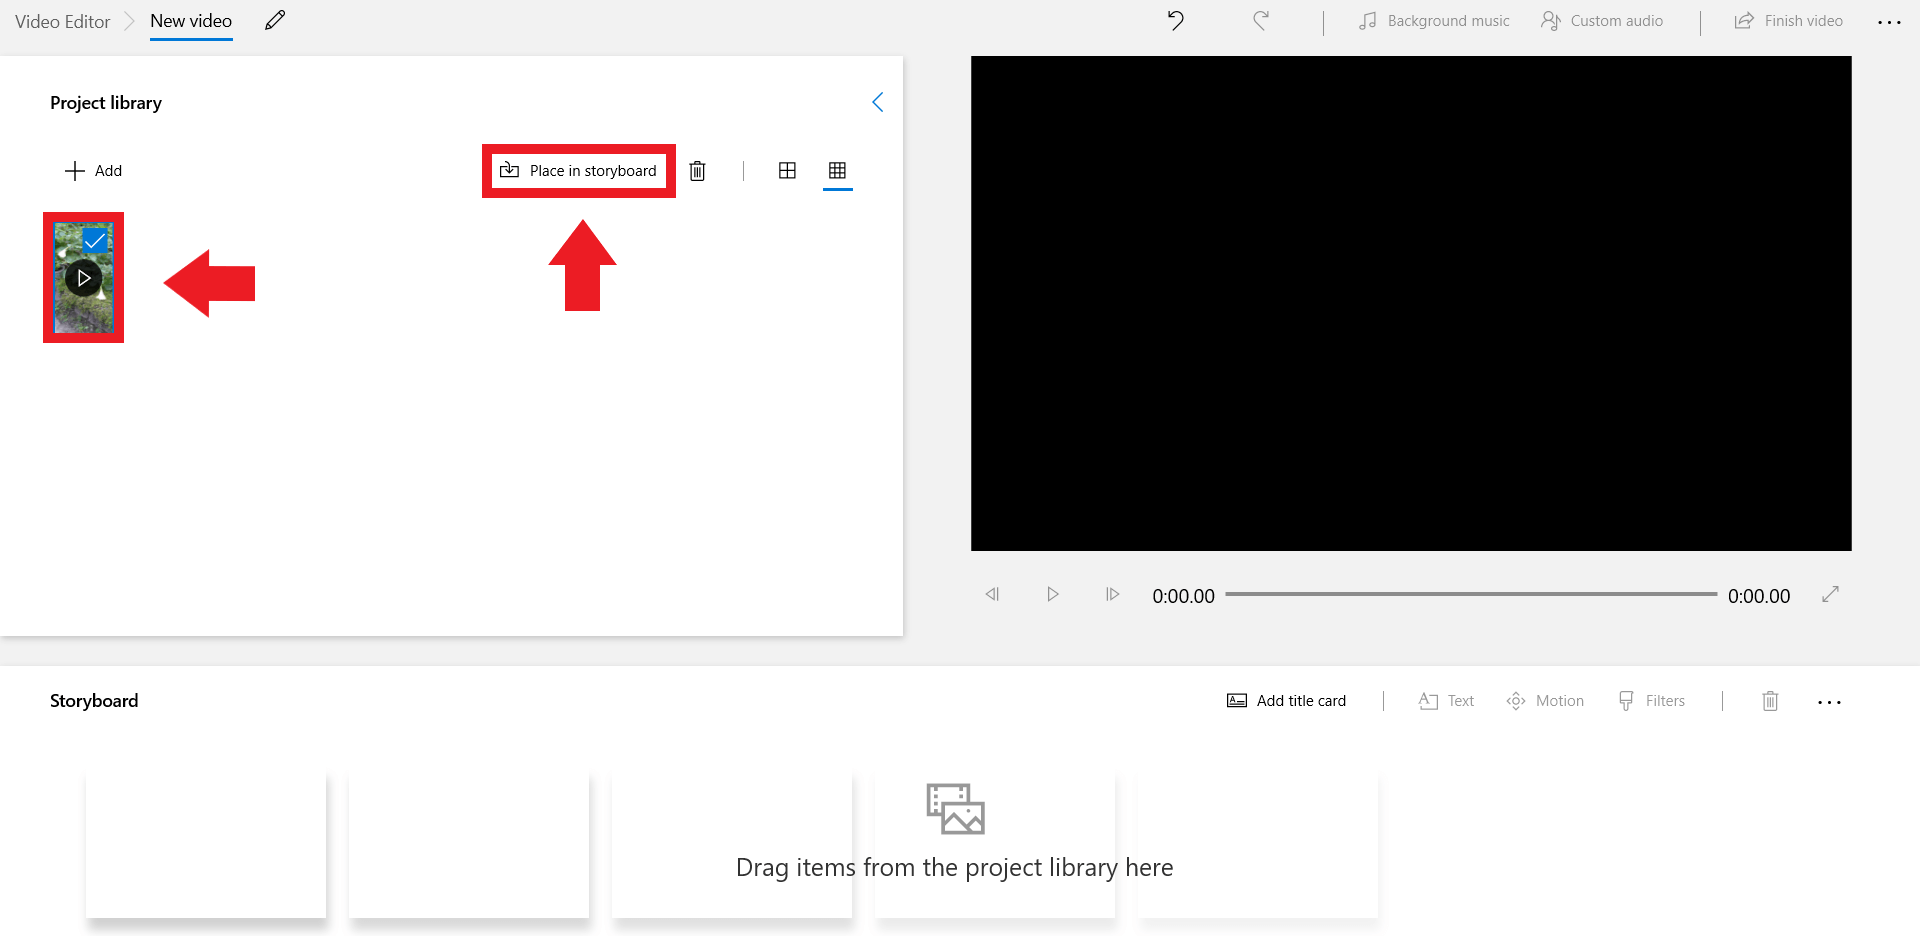 Click on the imported video and then on “Place in storyboard”